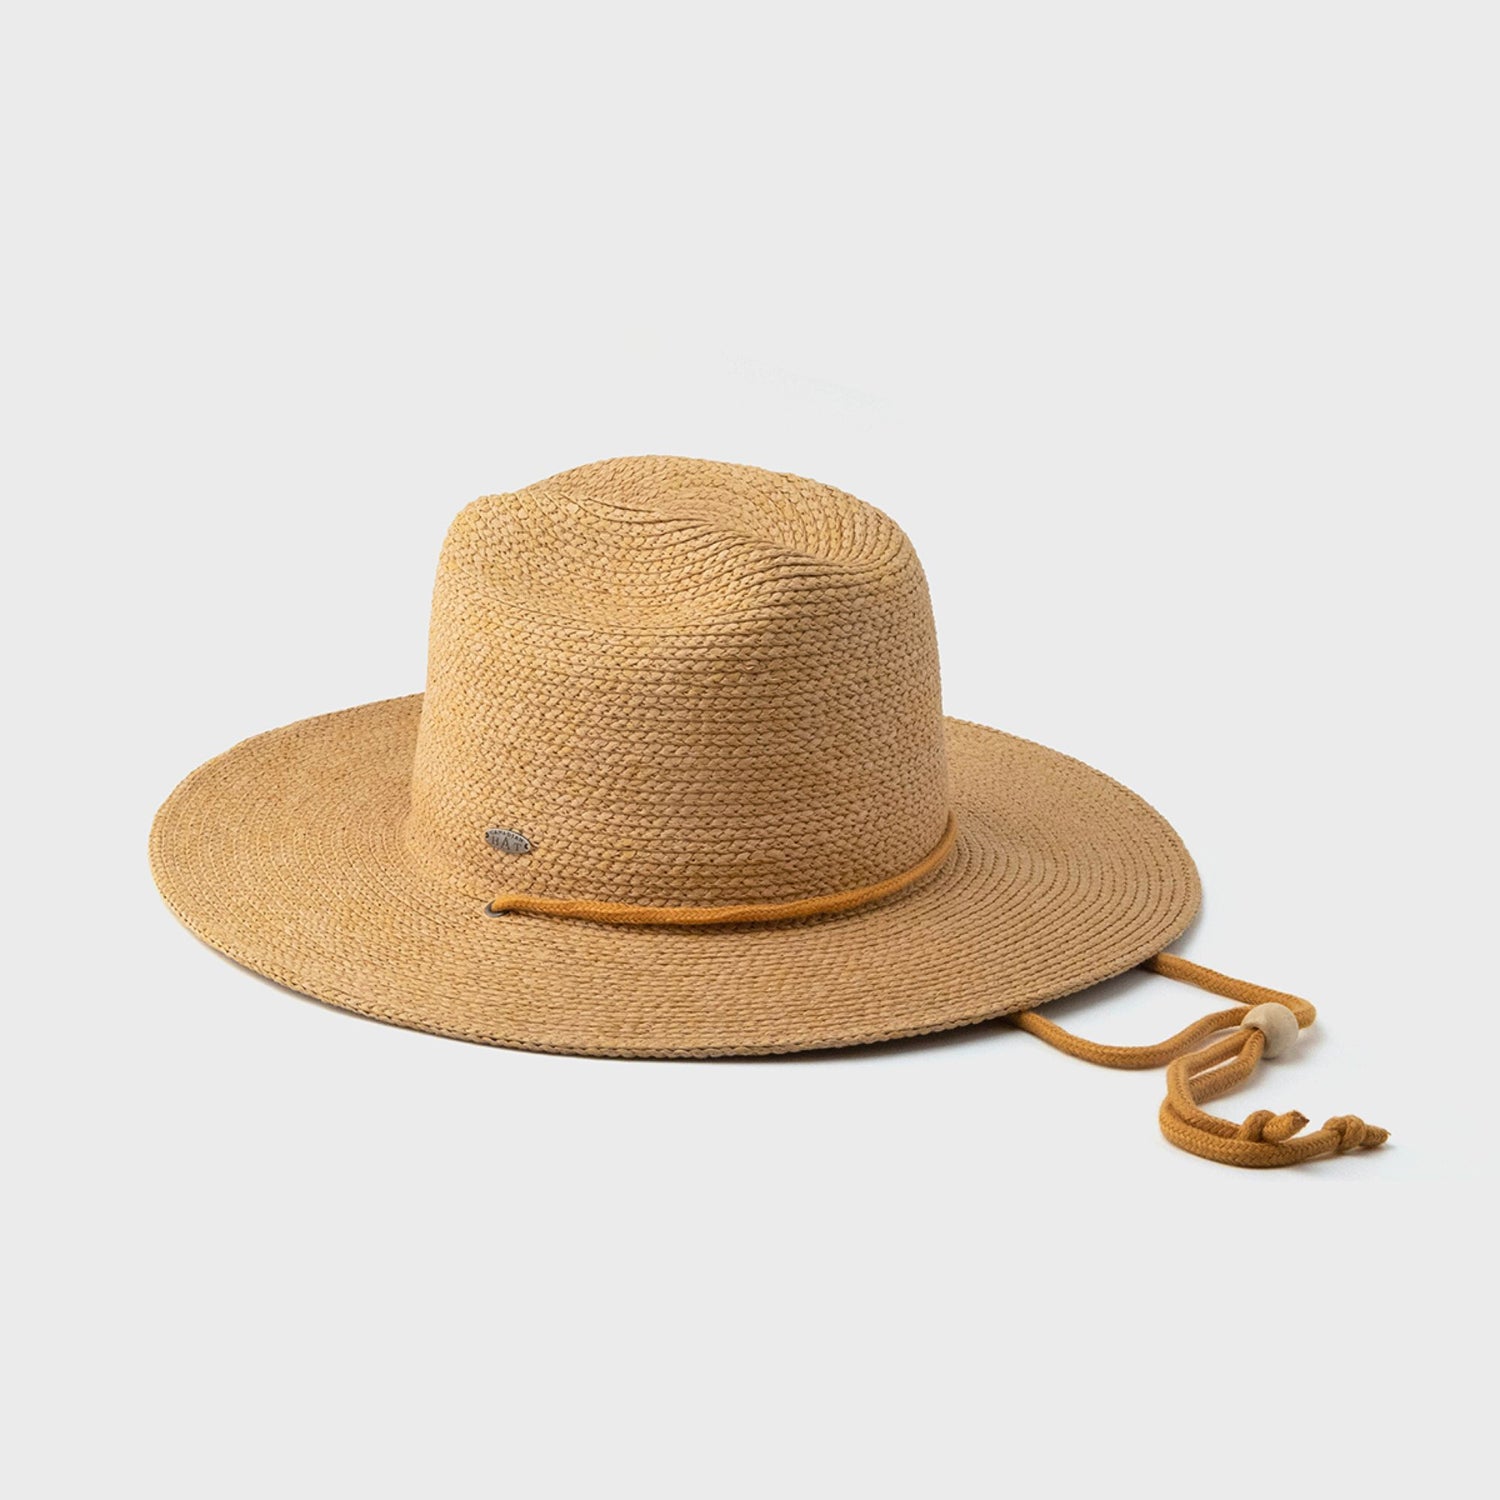 OPIA - LARGE OUTBACK BUCKET HAT W CORD